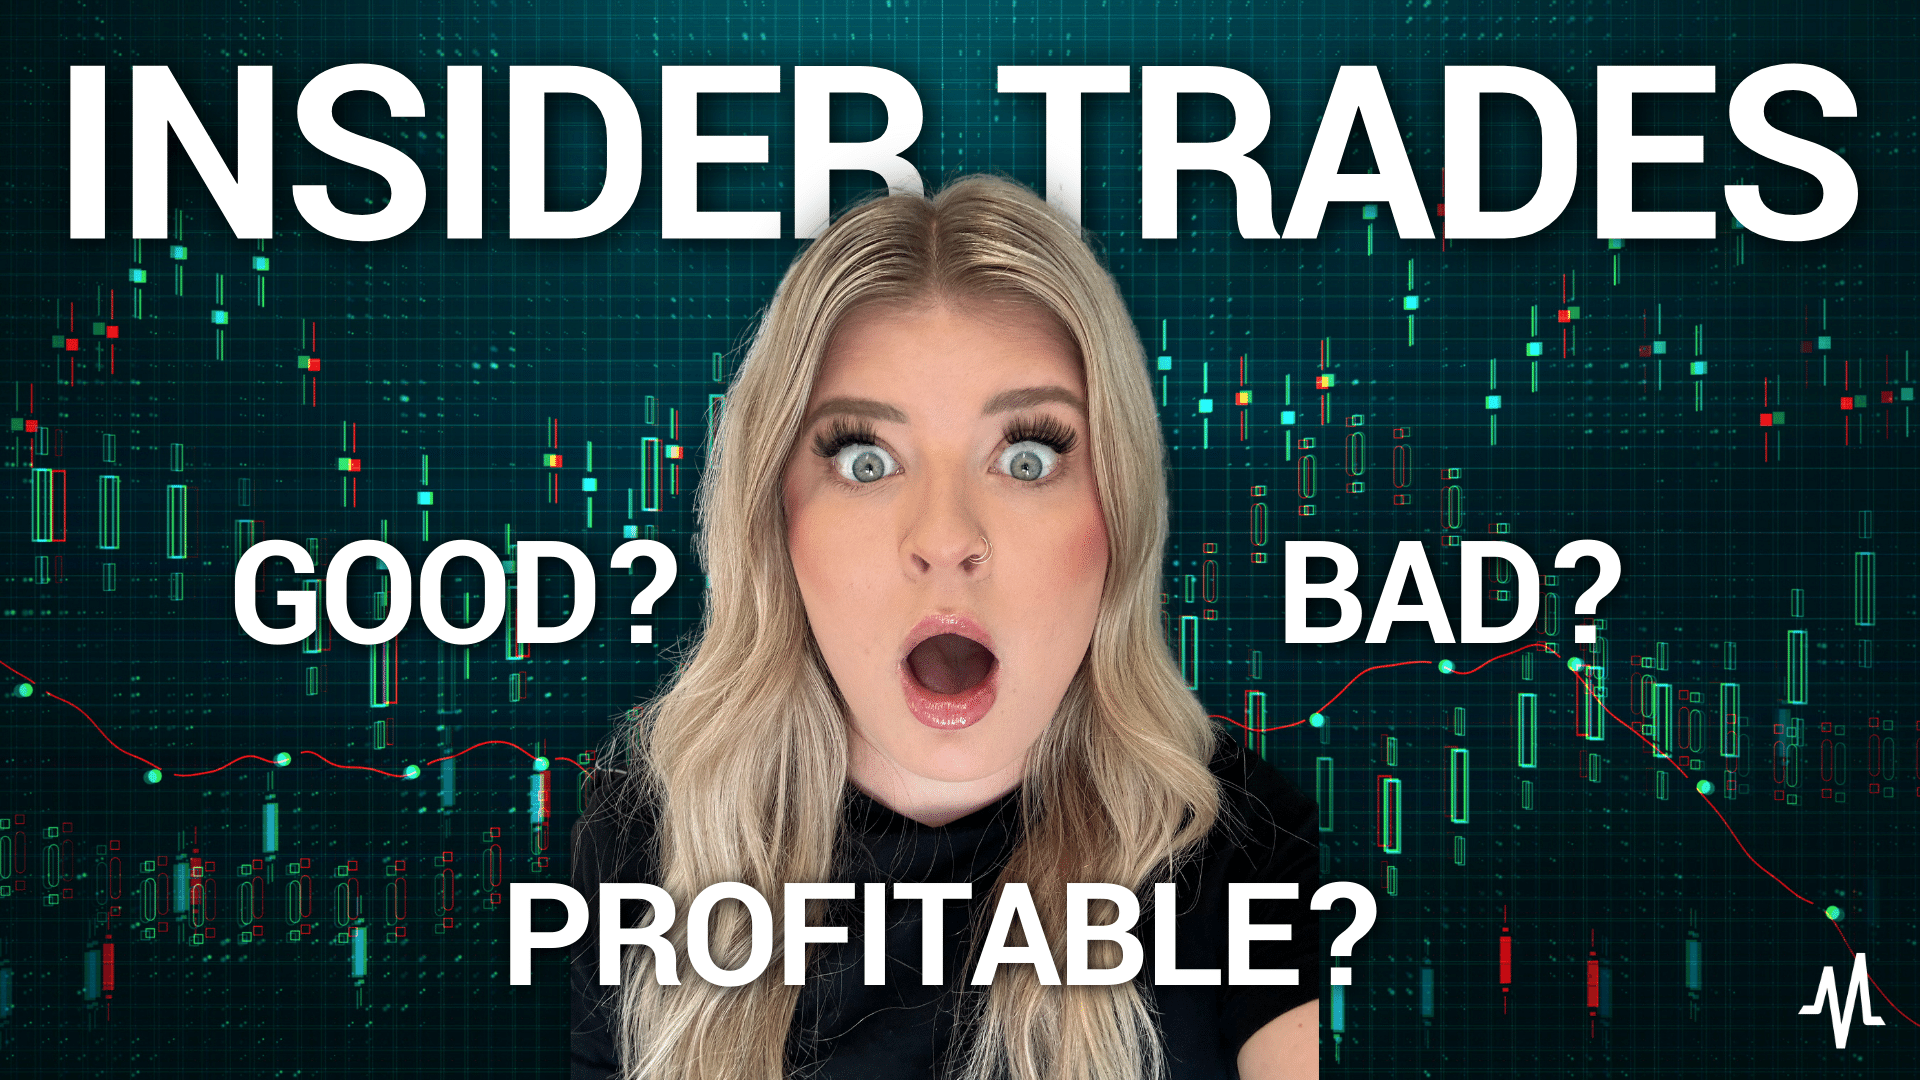 Insider Trades: The Good, The Bad, and The Profitable